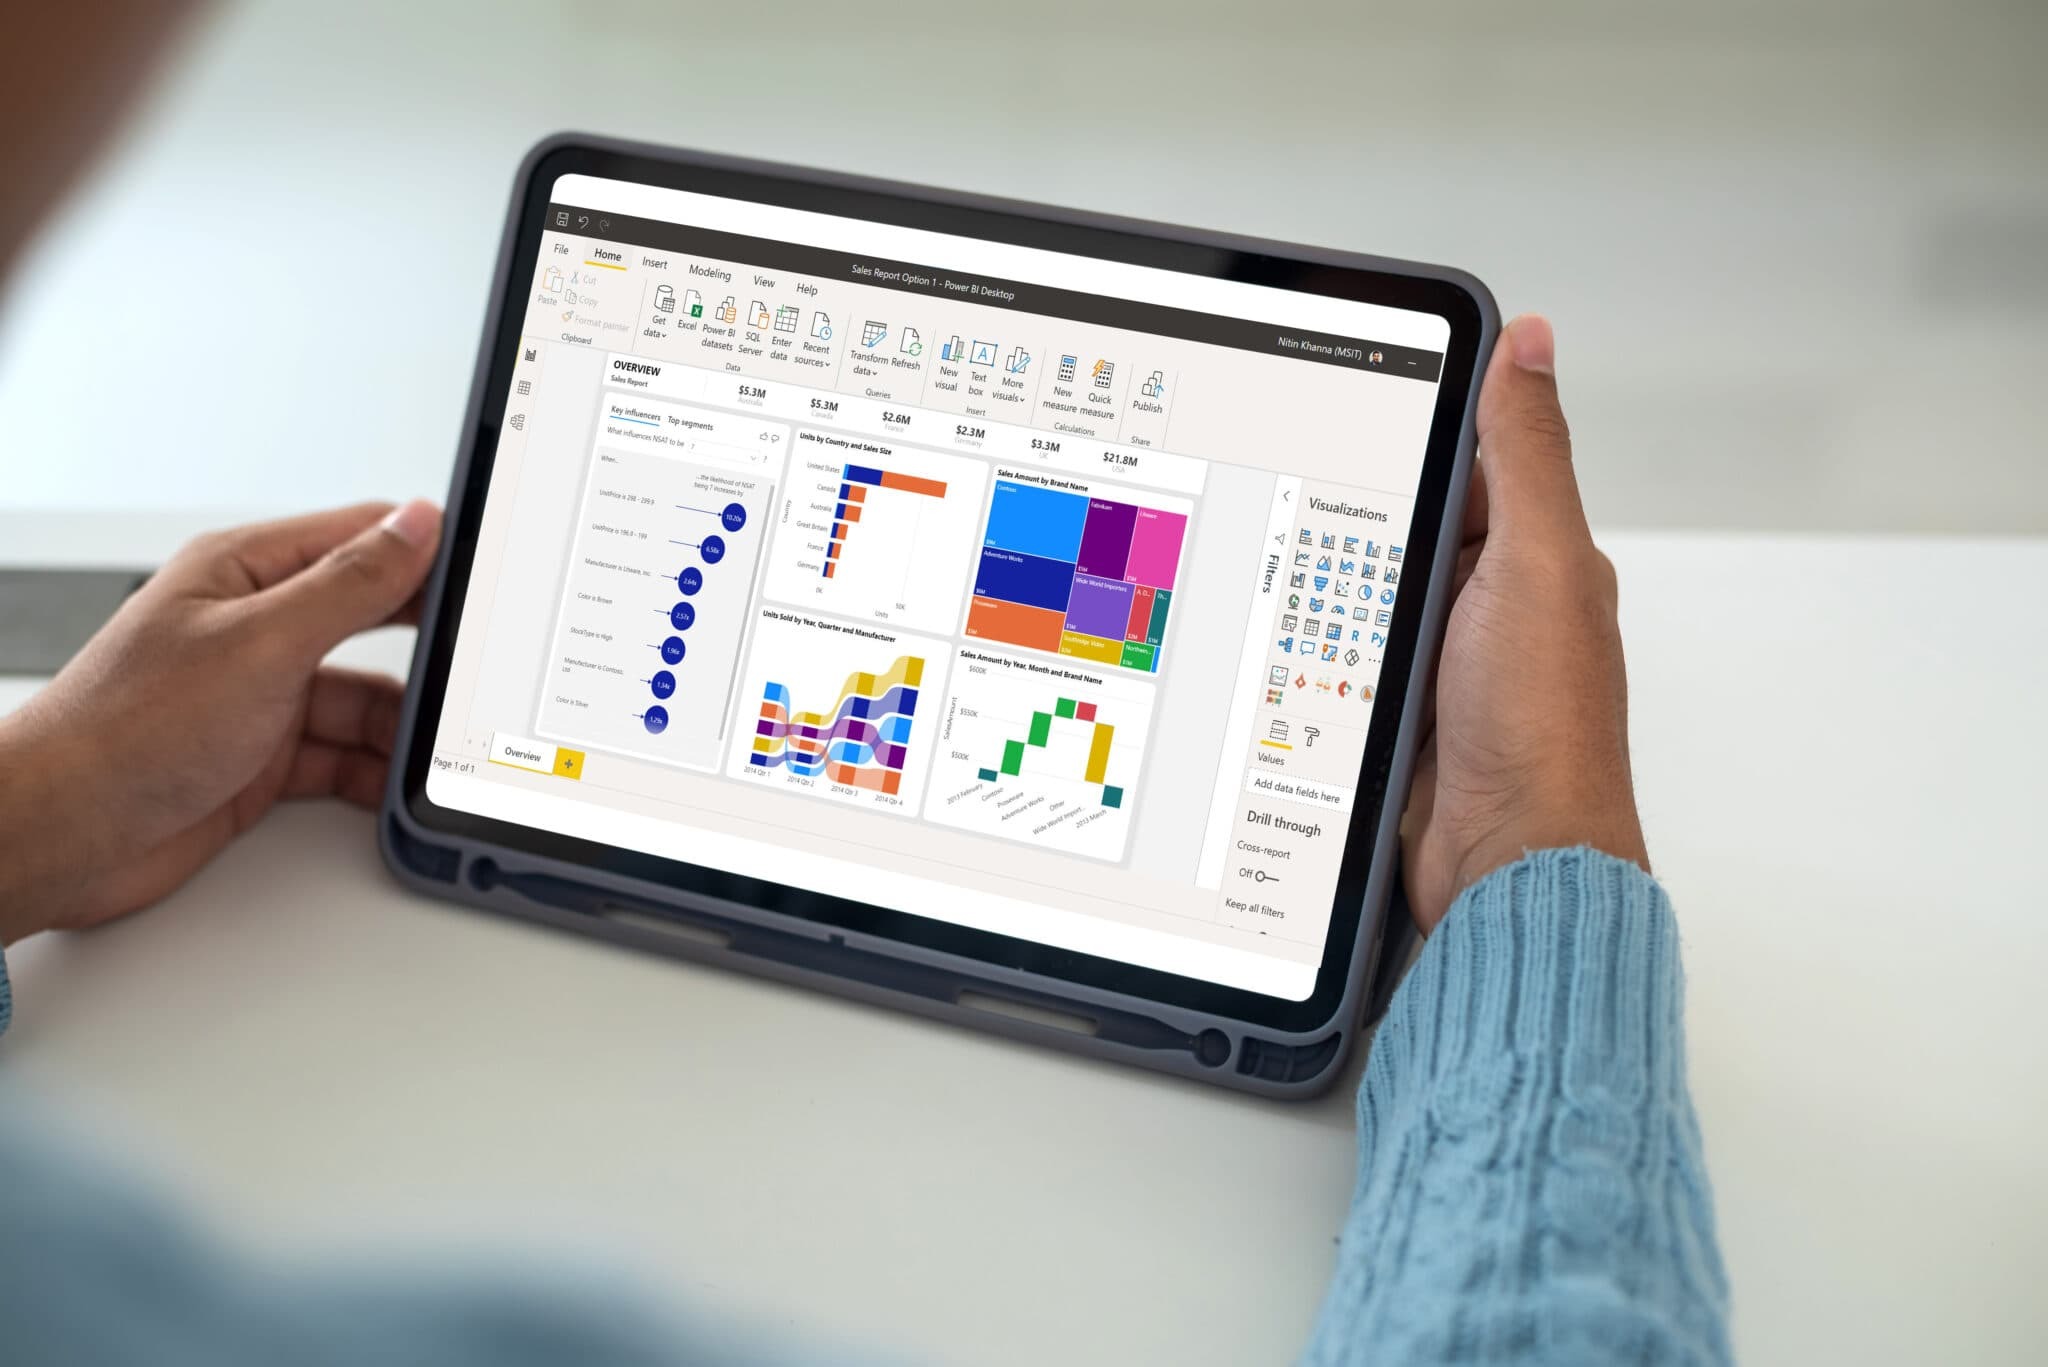 Microsoft Excel on Surface Pro 4: A productivity powerhouse combining Excel's features with the versatility of the Surface Pro 4.